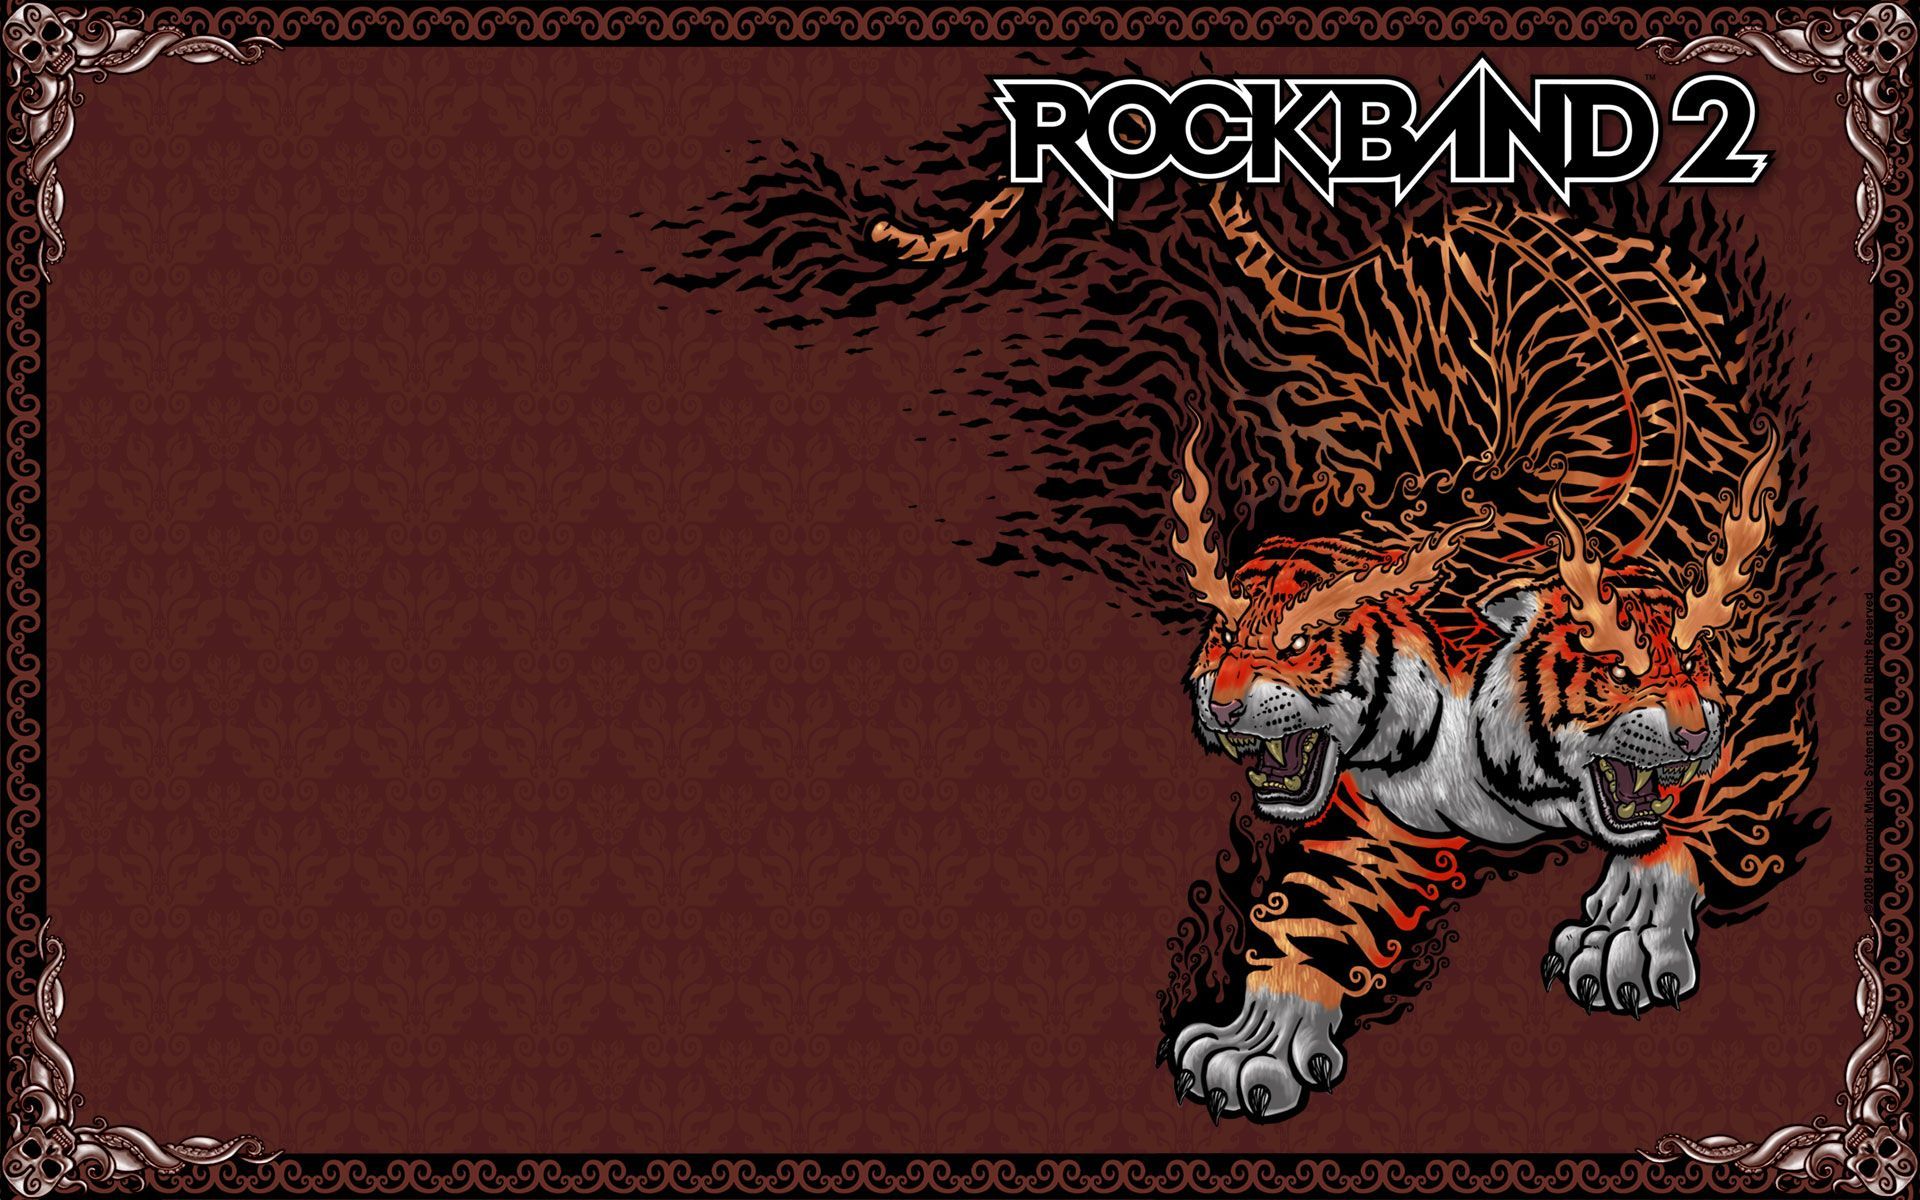 Rock Band 2 game wallpaper Wallpapers - HD Wallpapers 84198